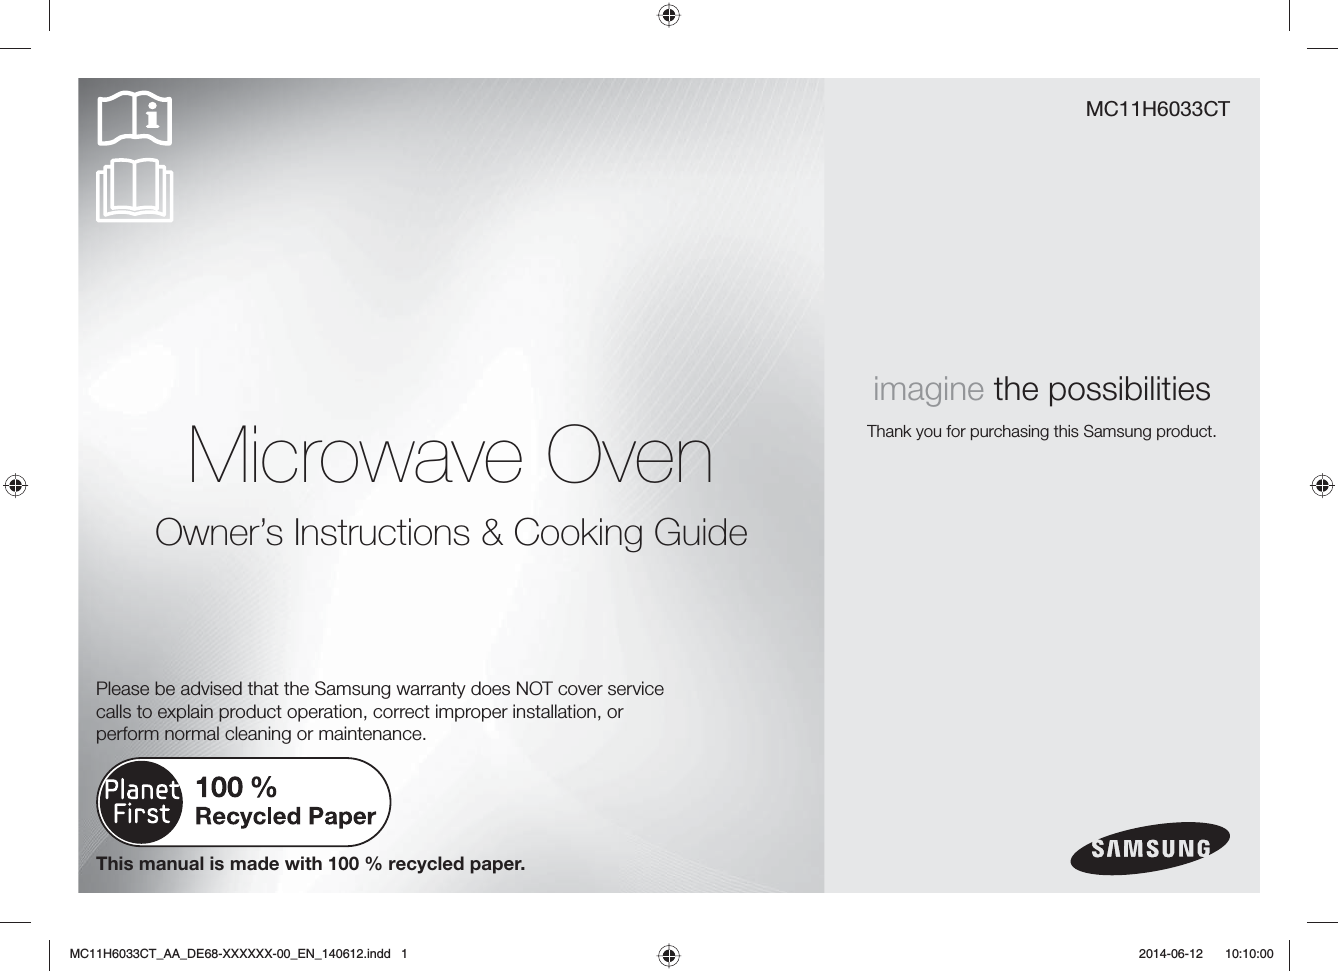 Microwave OvenOwner’s Instructions &amp; Cooking GuideMC11H6033CTimagine the possibilitiesThank you for purchasing this Samsung product.This manual is made with 100 % recycled paper.Please be advised that the Samsung warranty does NOT cover service calls to explain product operation, correct improper installation, or perform normal cleaning or maintenance.MC11H6033CT_AA_DE68-XXXXXX-00_EN_140612.indd   1  